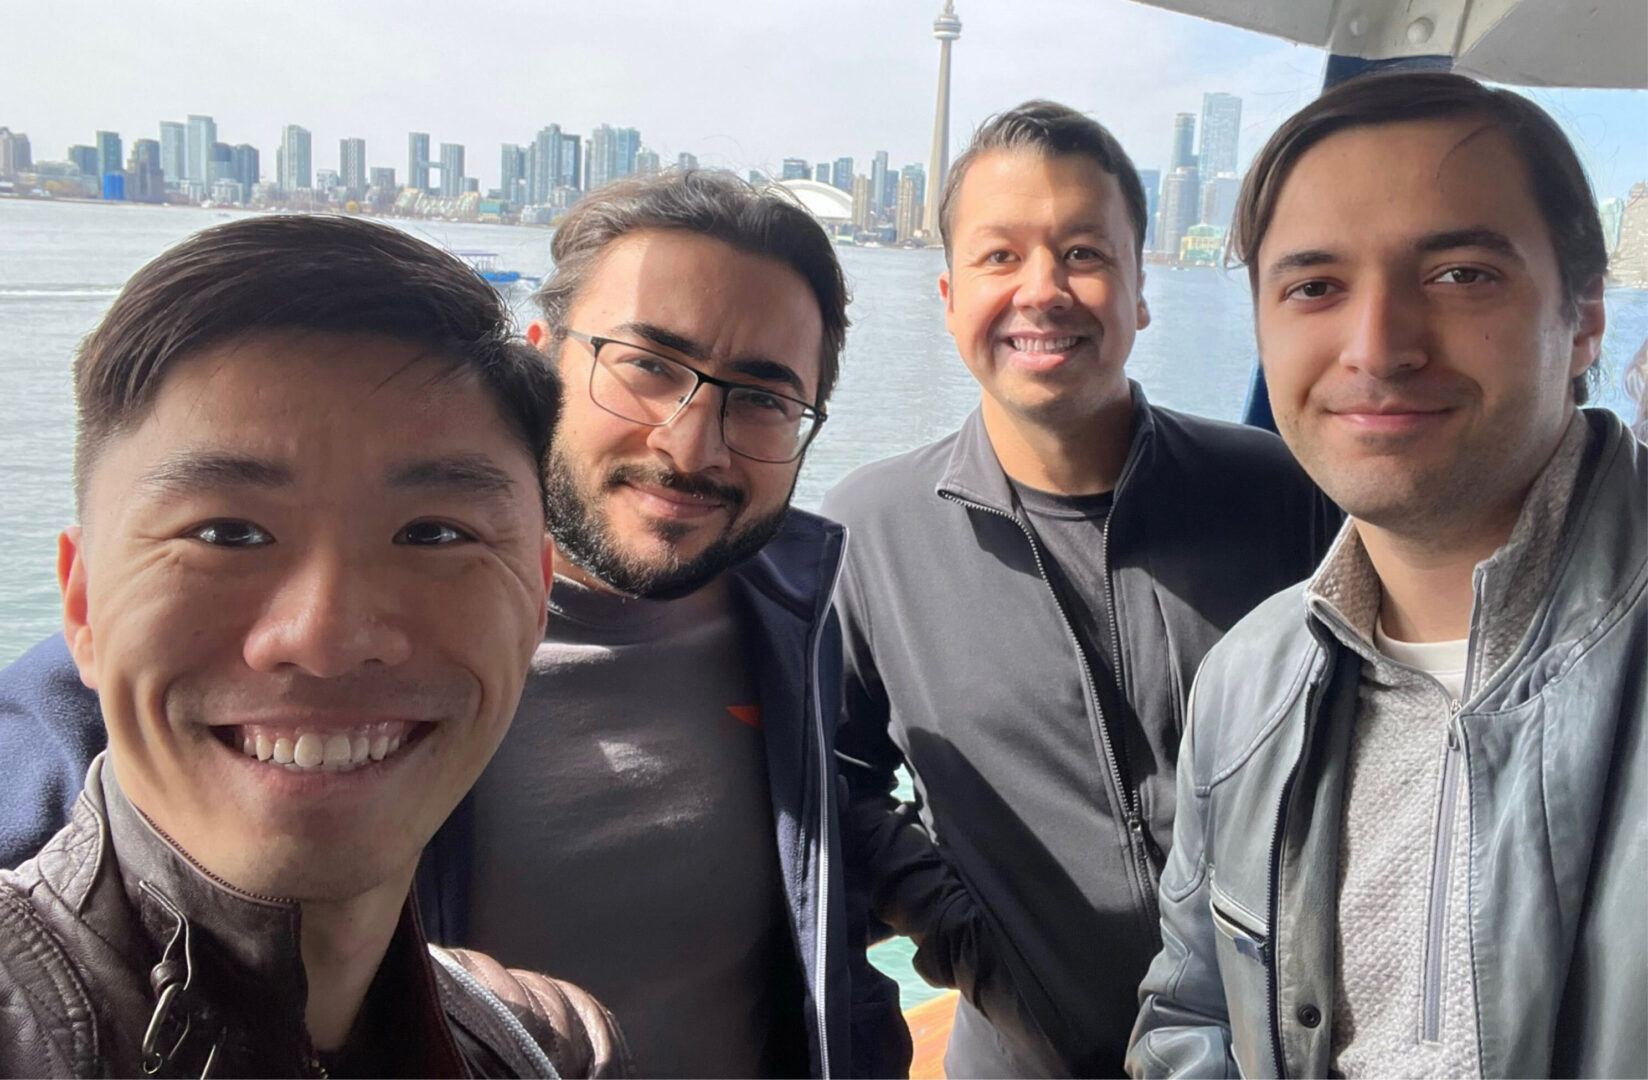 The founders of automation insurance startup Koop include (from left) head of operations Jim Duan, chief commercial officer Kamron Khodjaev, chief technology officer Zak Gazizov, and CEO Sergey Litvinenko. Founded in 2020, the North Side-based company raised $2.5 million in seed funding last year.